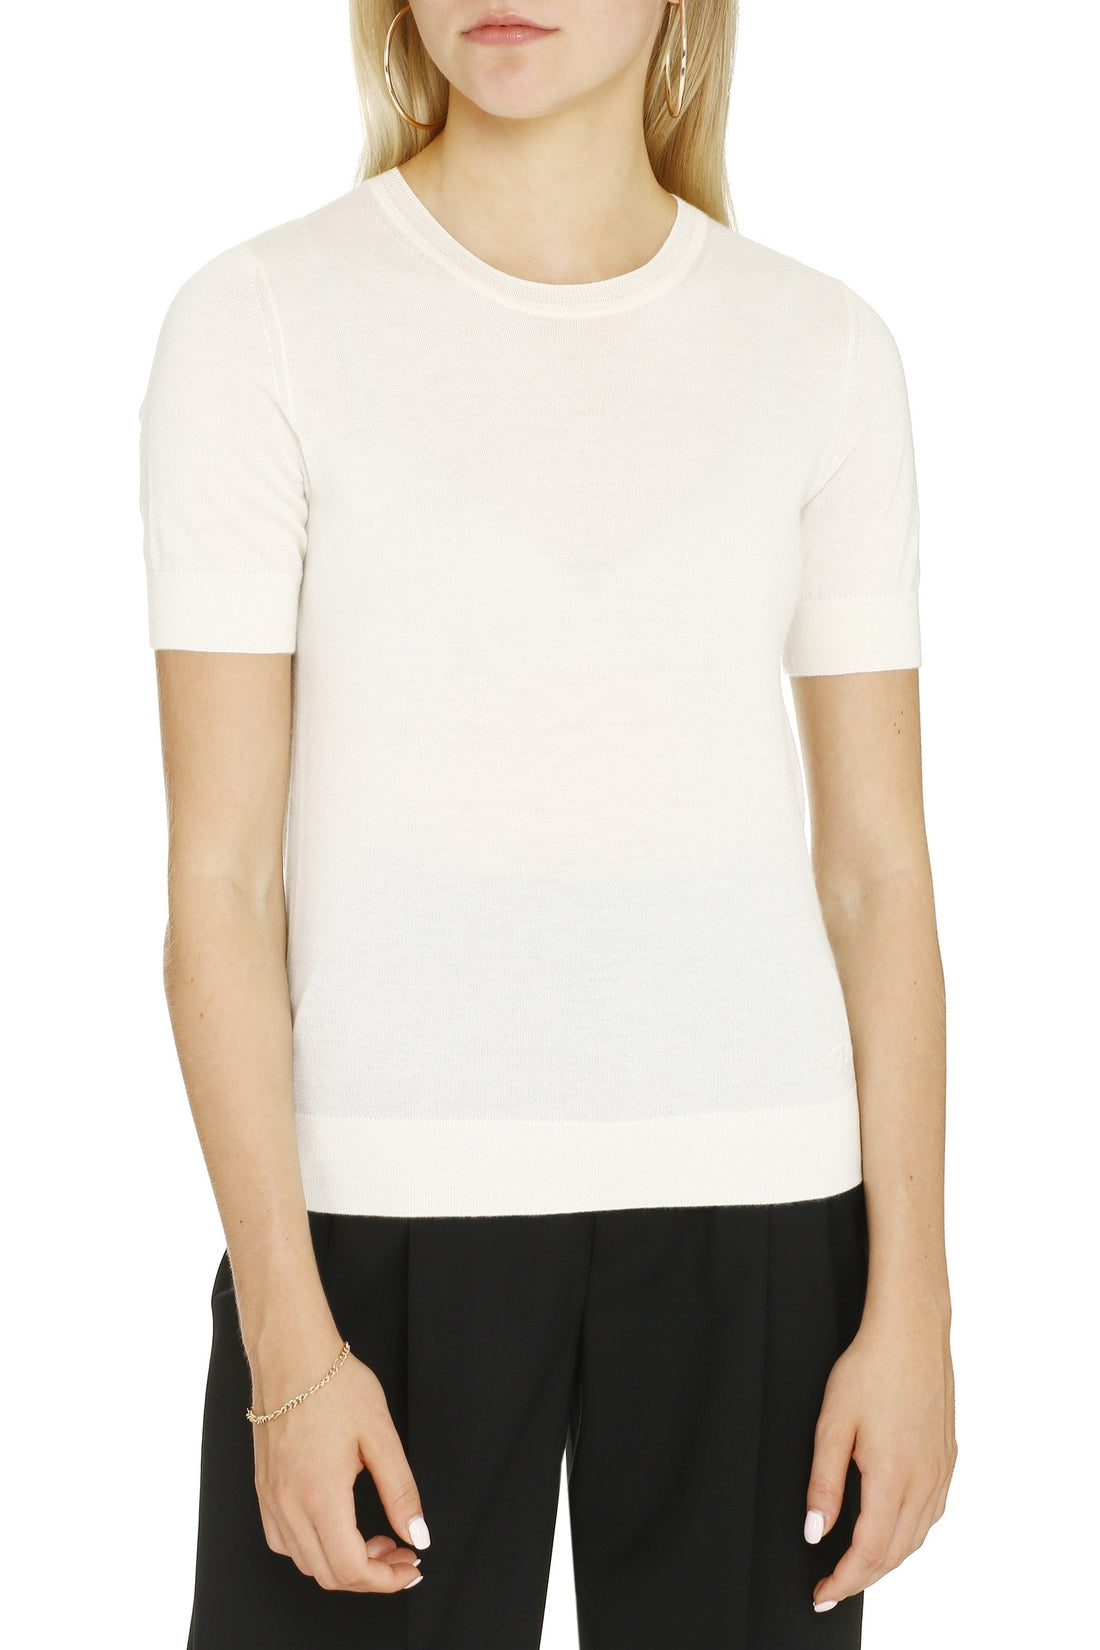 Tory Burch-OUTLET-SALE-Iberia short sleeve sweater-ARCHIVIST